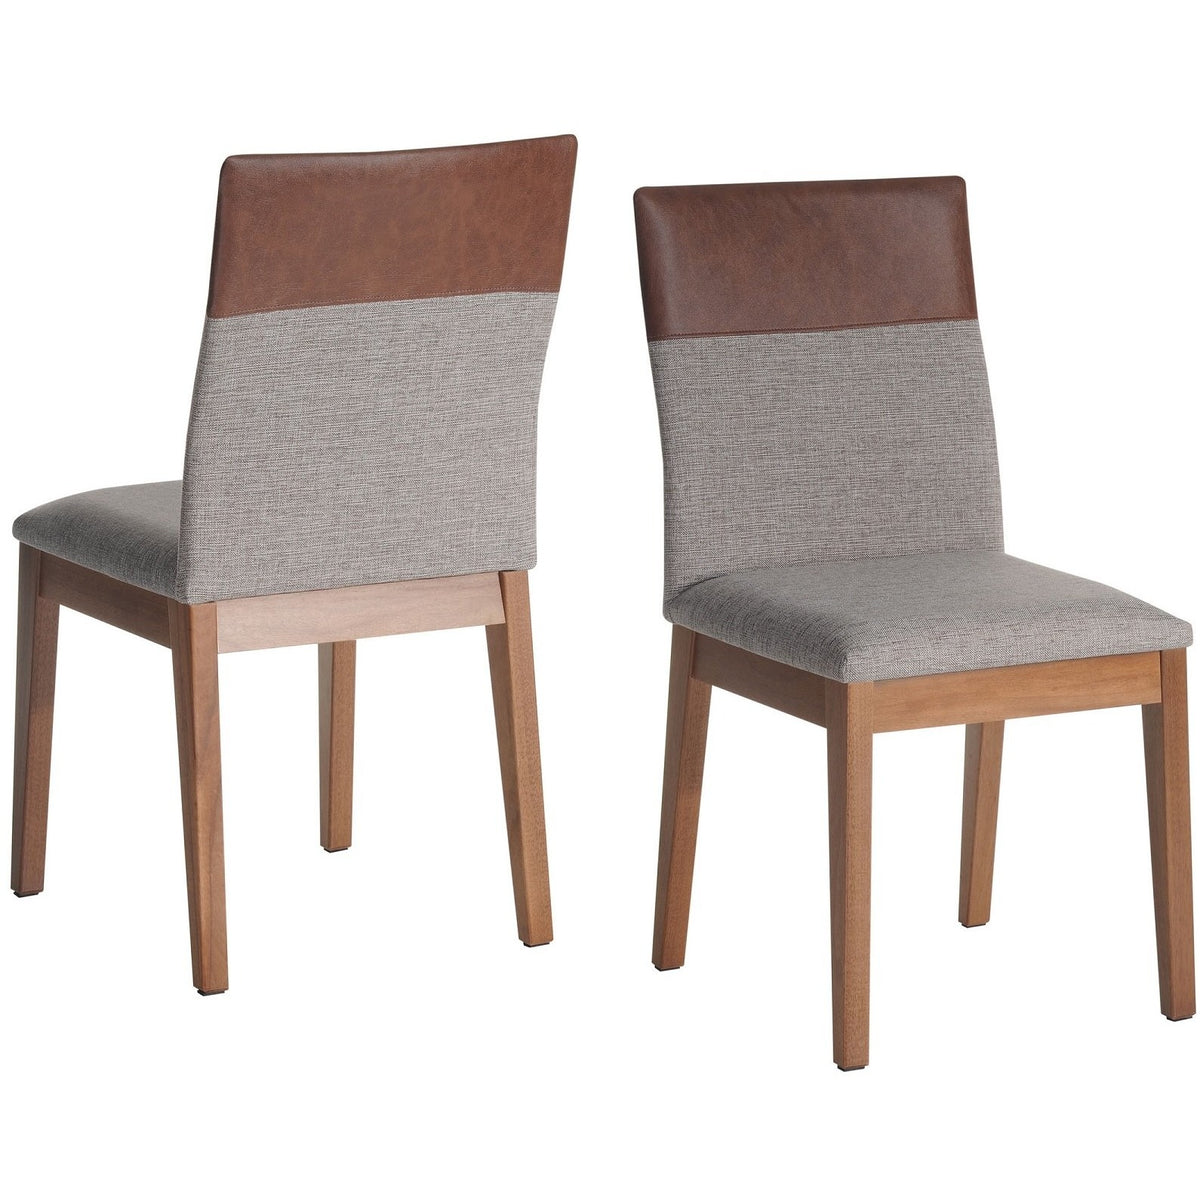 Manhattan Comfort Duke 2-Piece Dining Chair in with Synthetic Leather Grey and Brown-Minimal & Modern